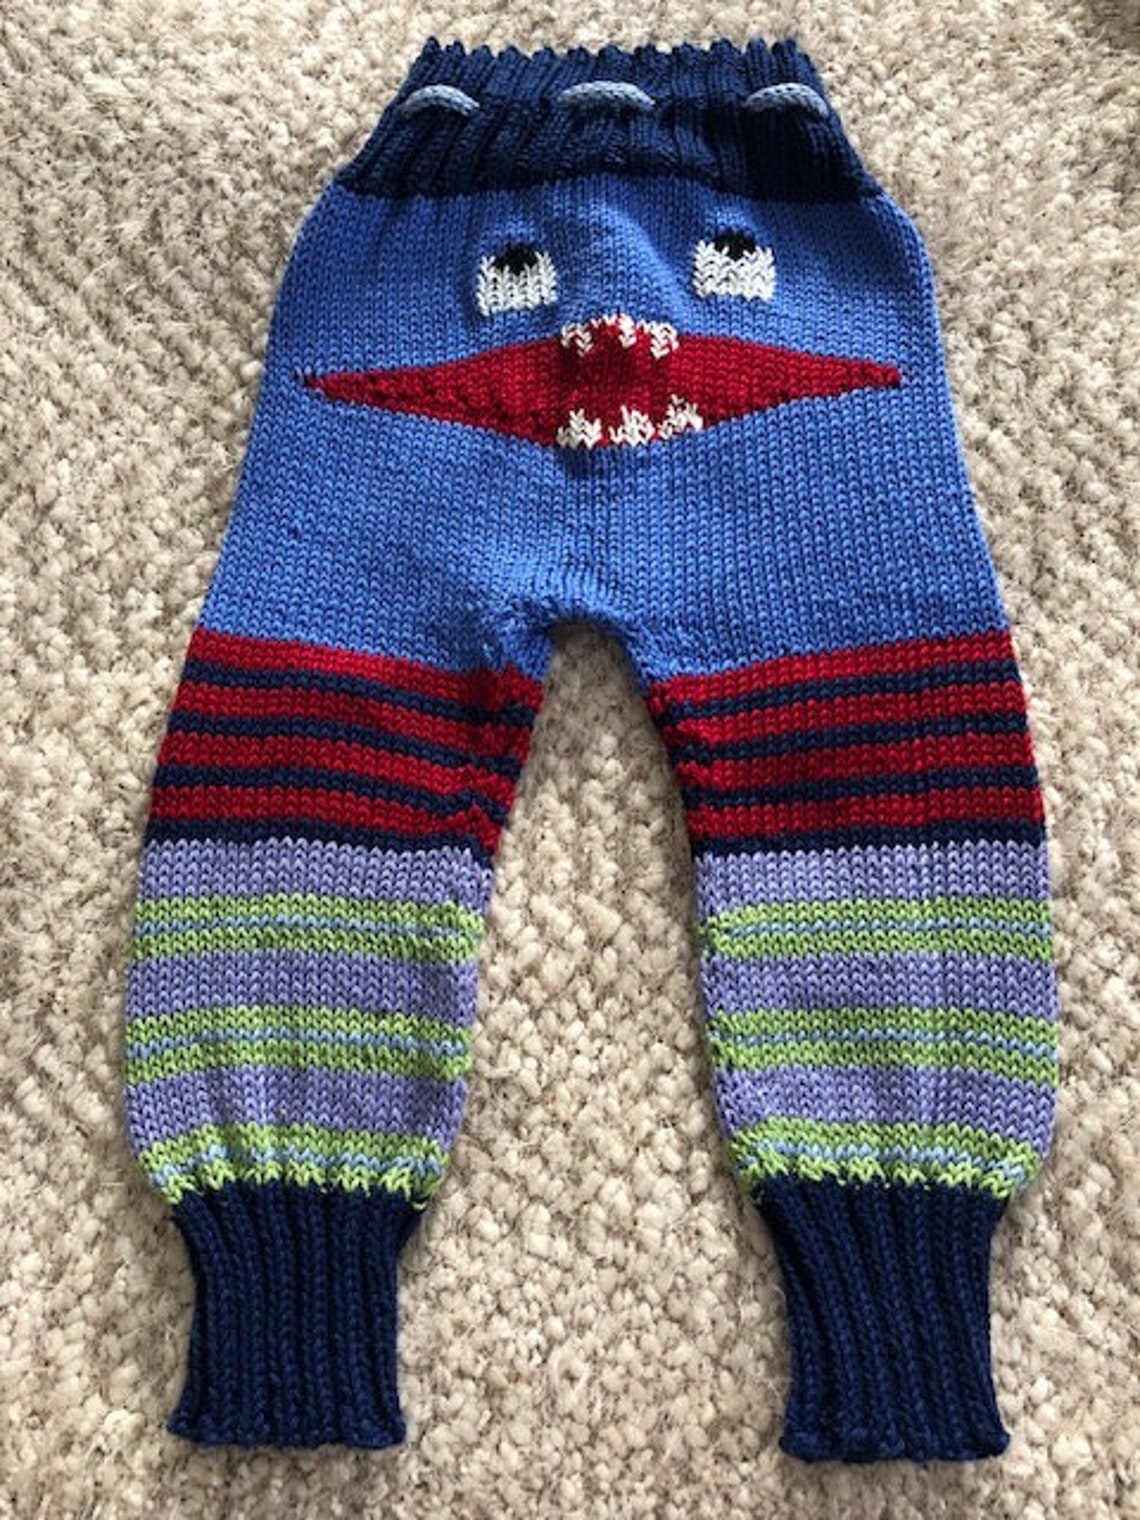 Monster pants for baby and toddler | Etsy